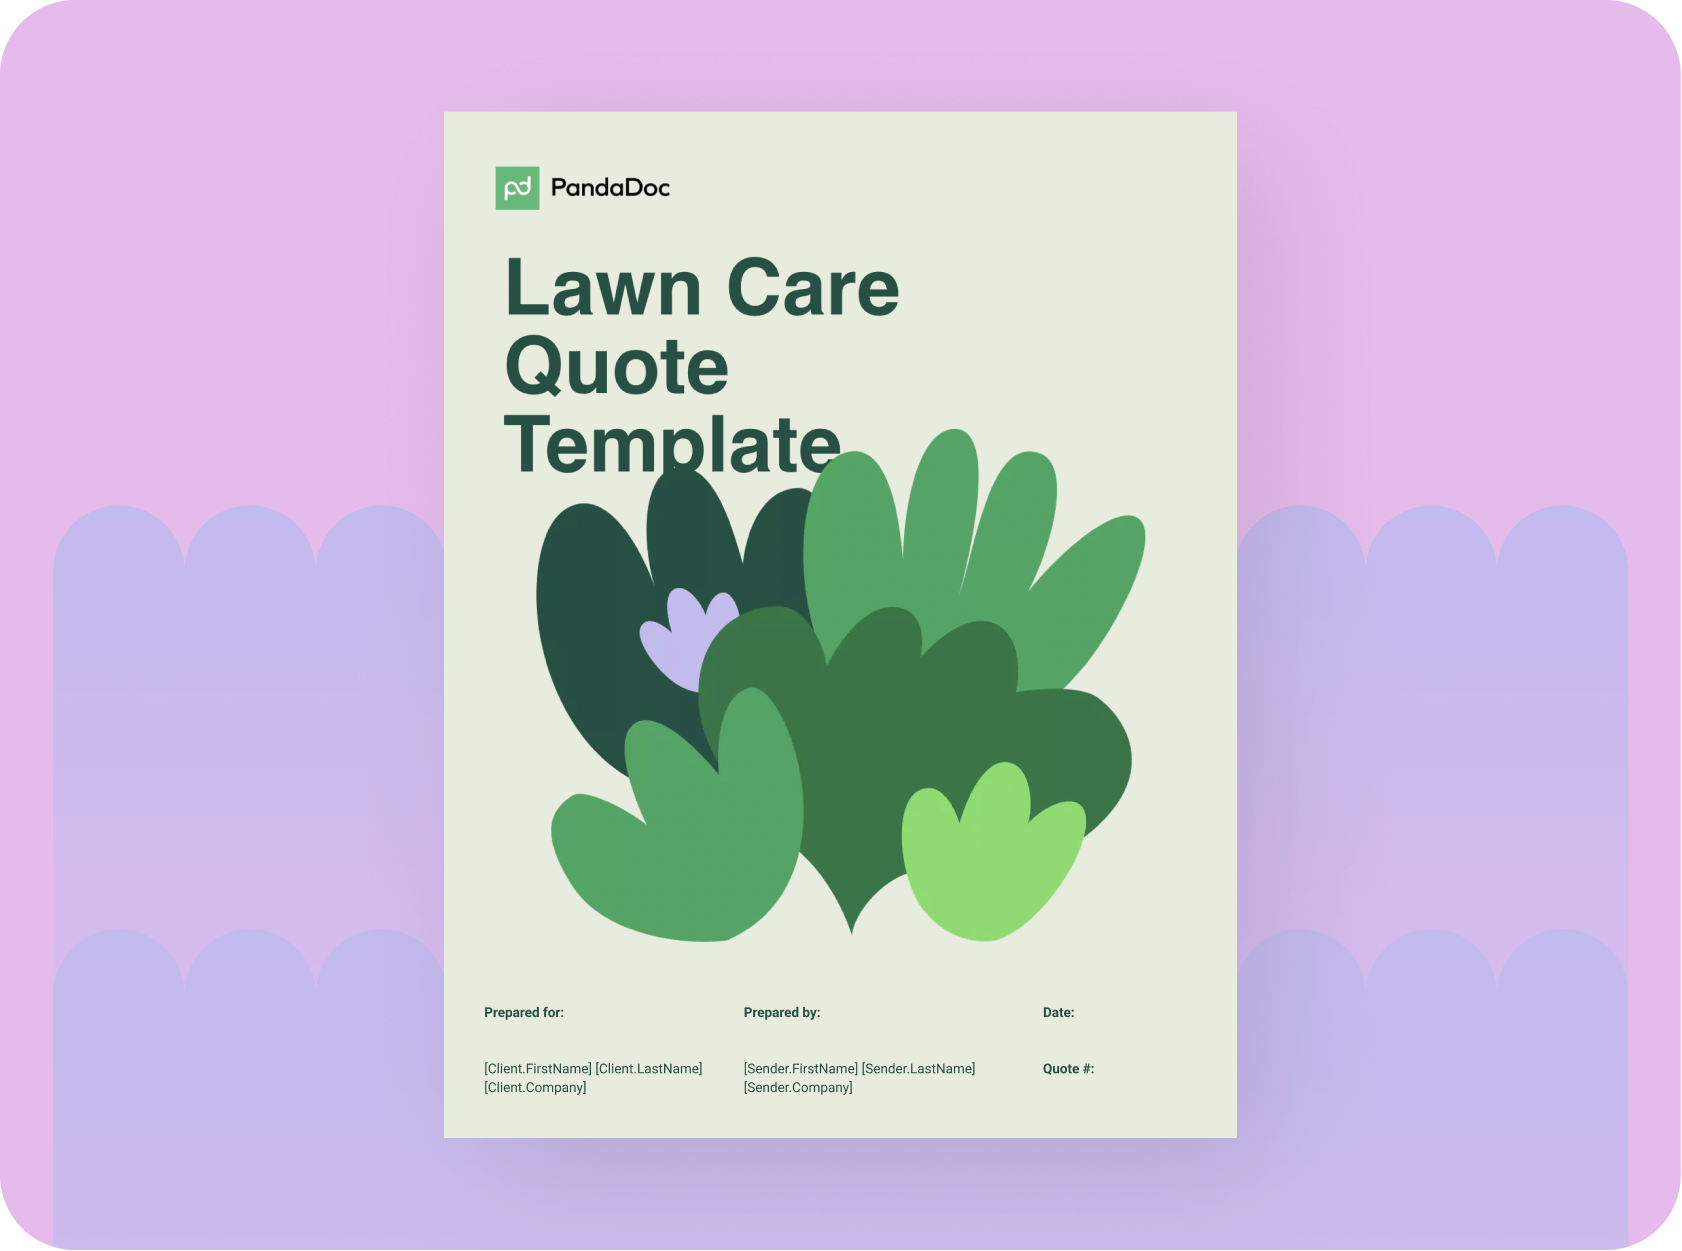 Lawn Care Quote Template PandaDoc